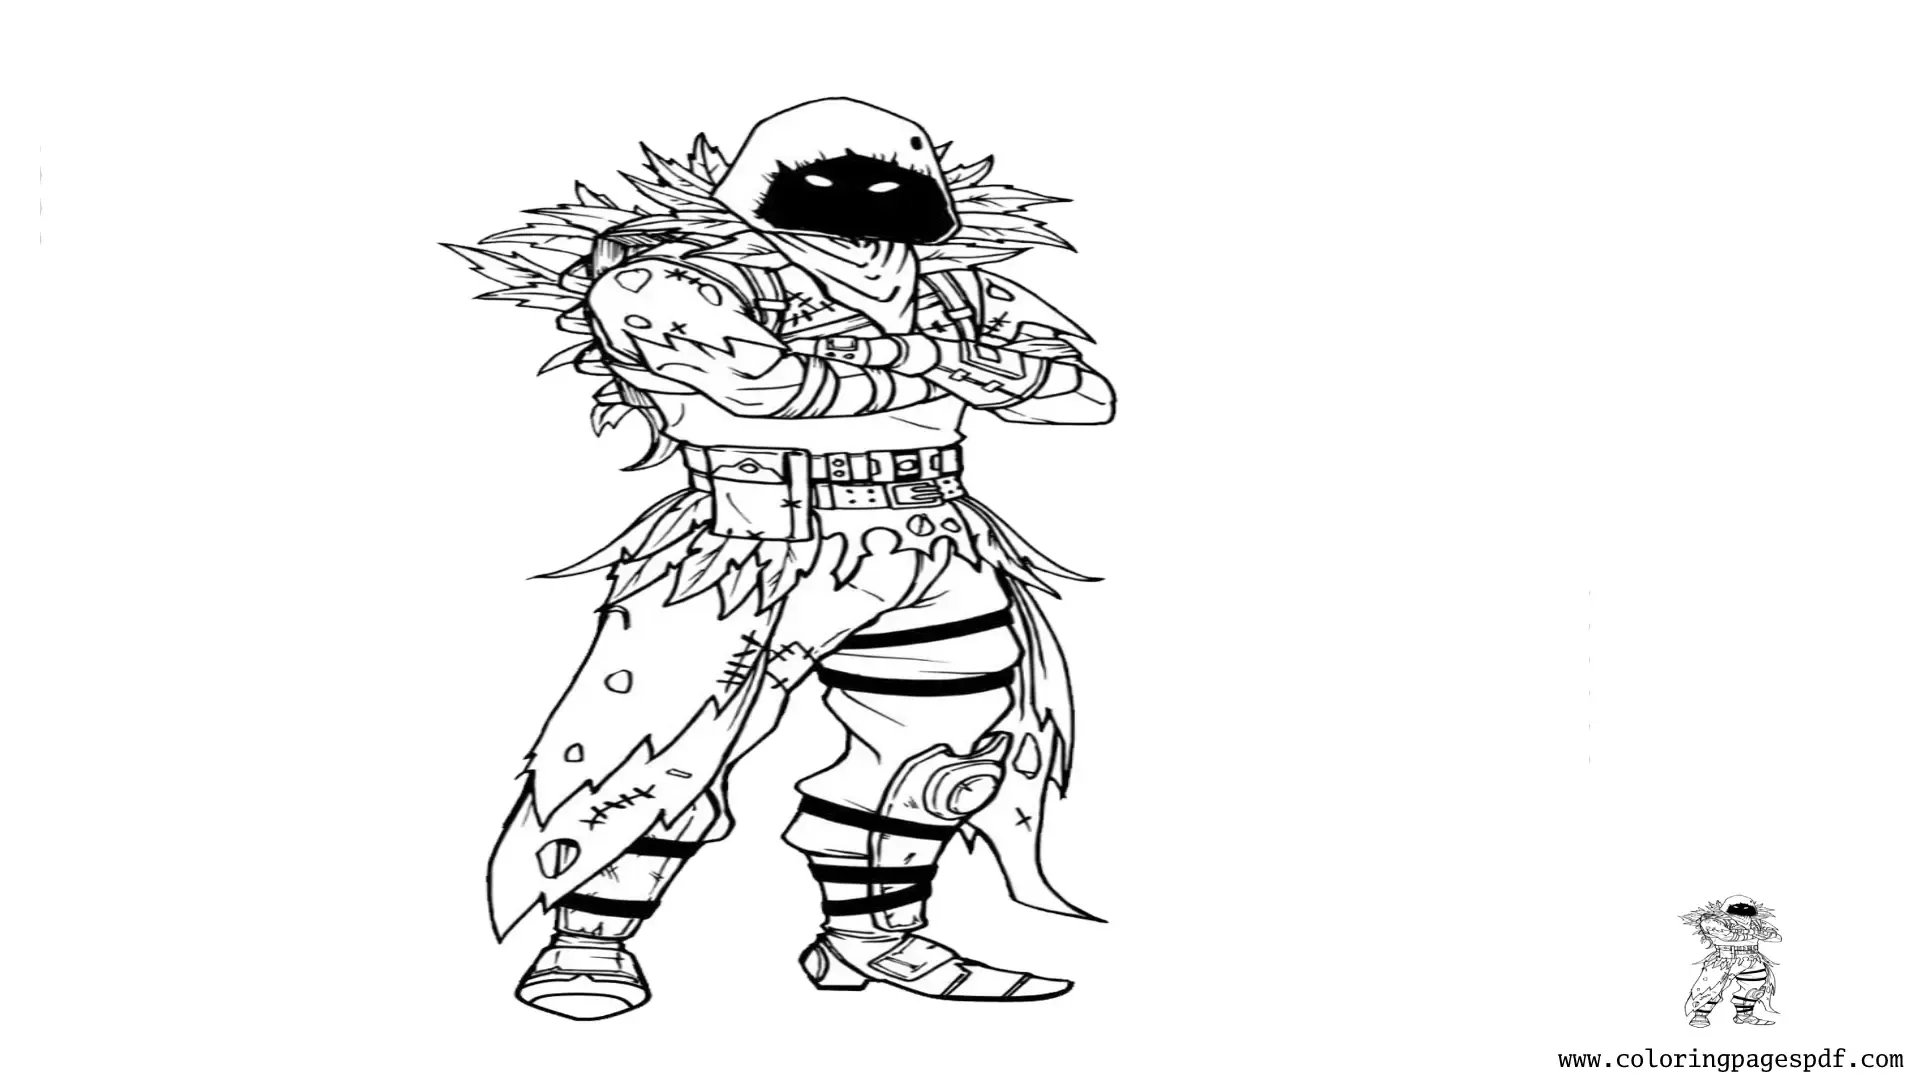 Coloring Page Of Fortnite Raven Skin